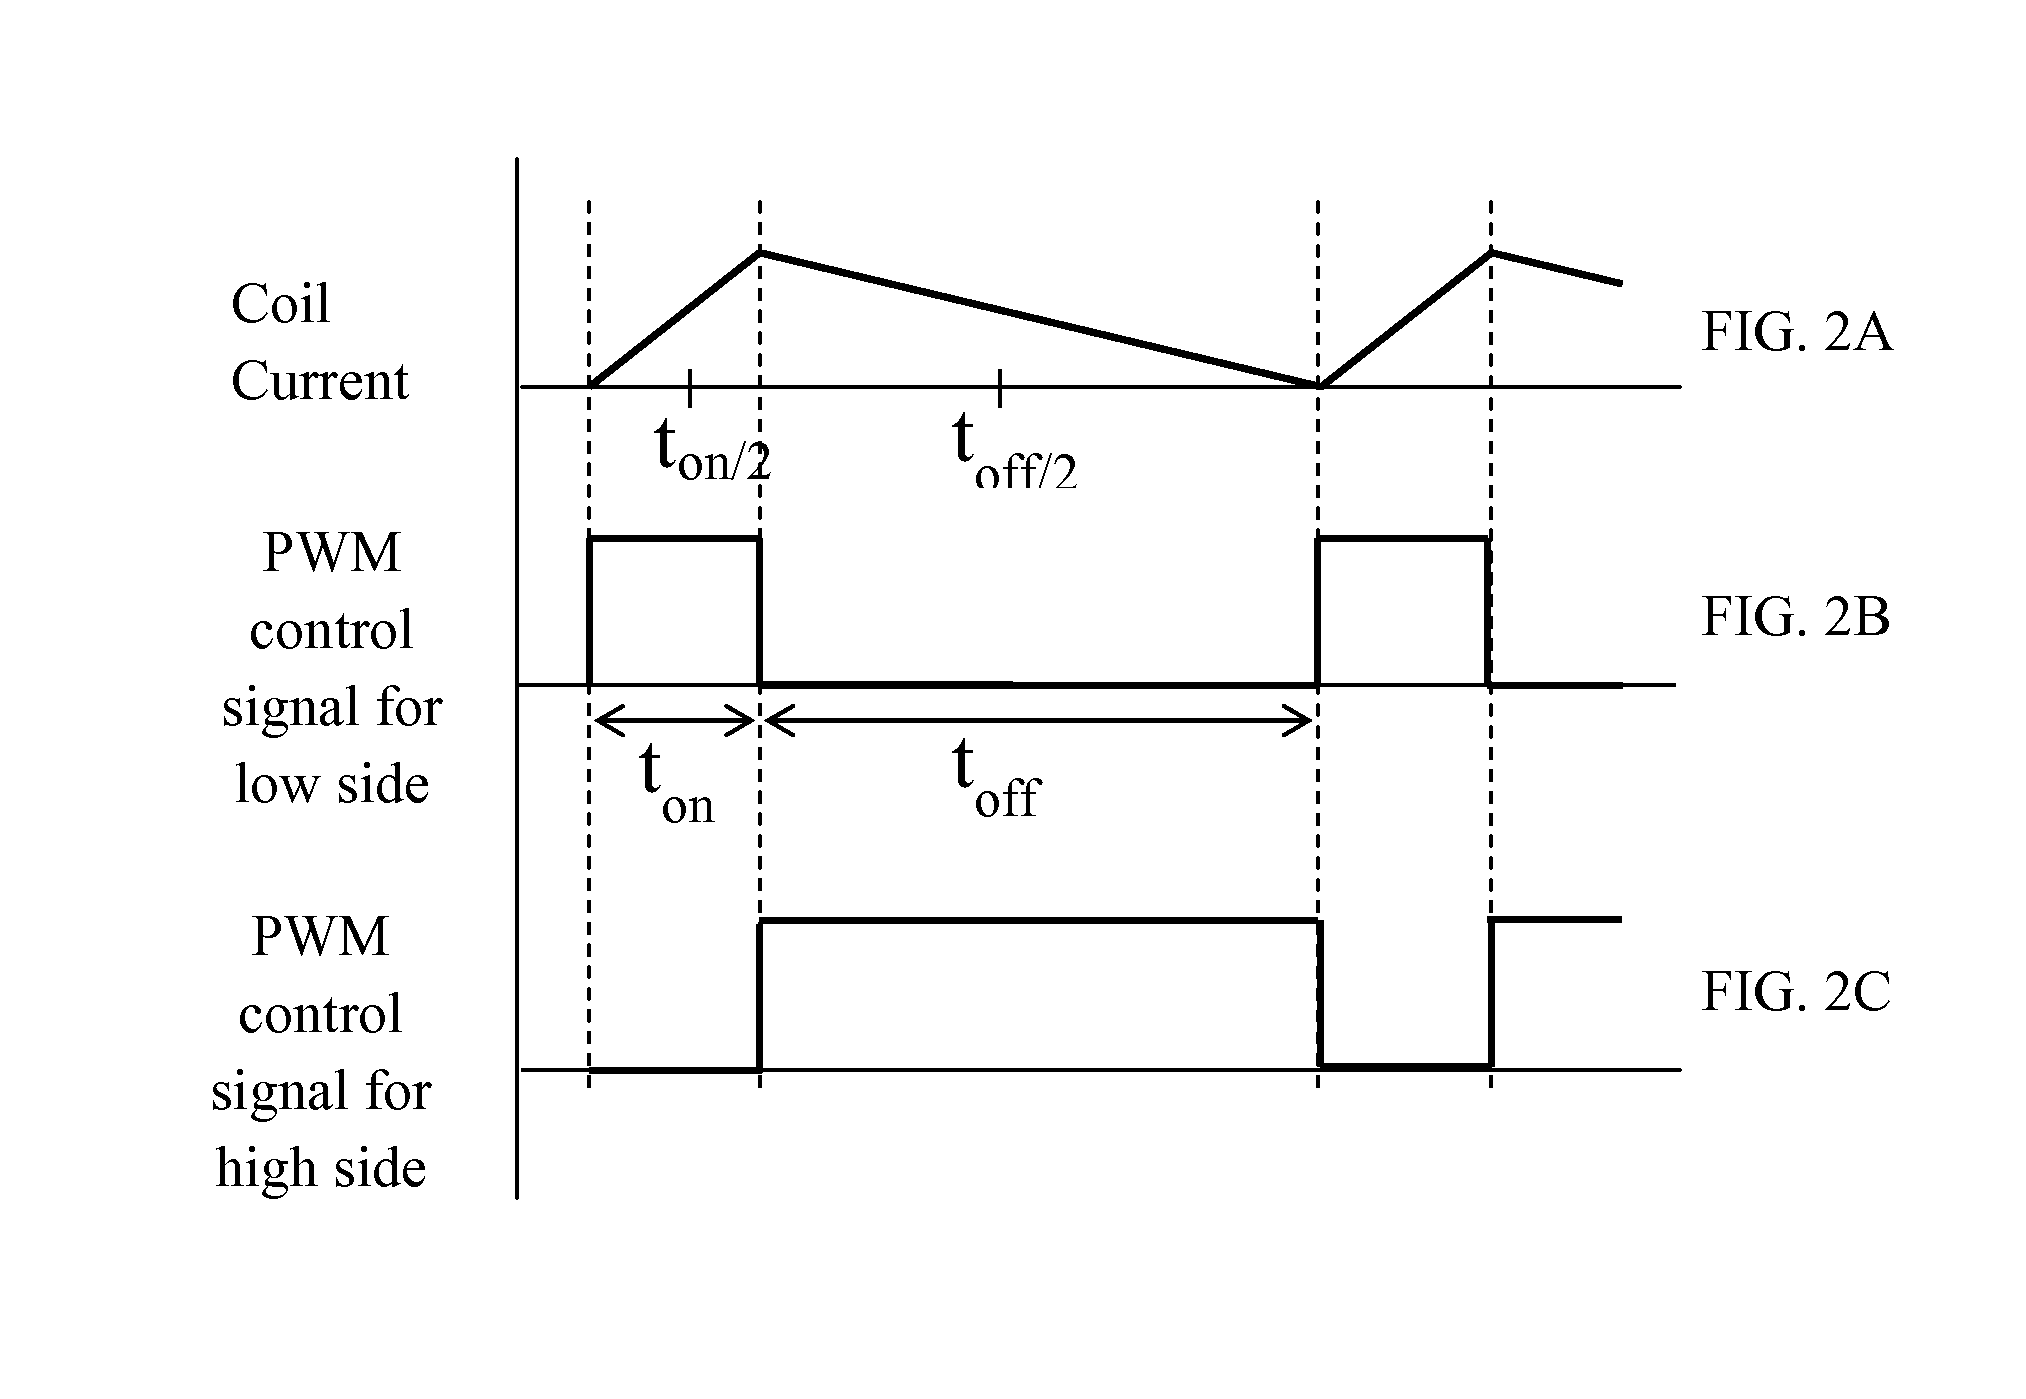 An inductive load control circuit, a braking system for a vehicle and a method of measuring current in an inductive load control circuit